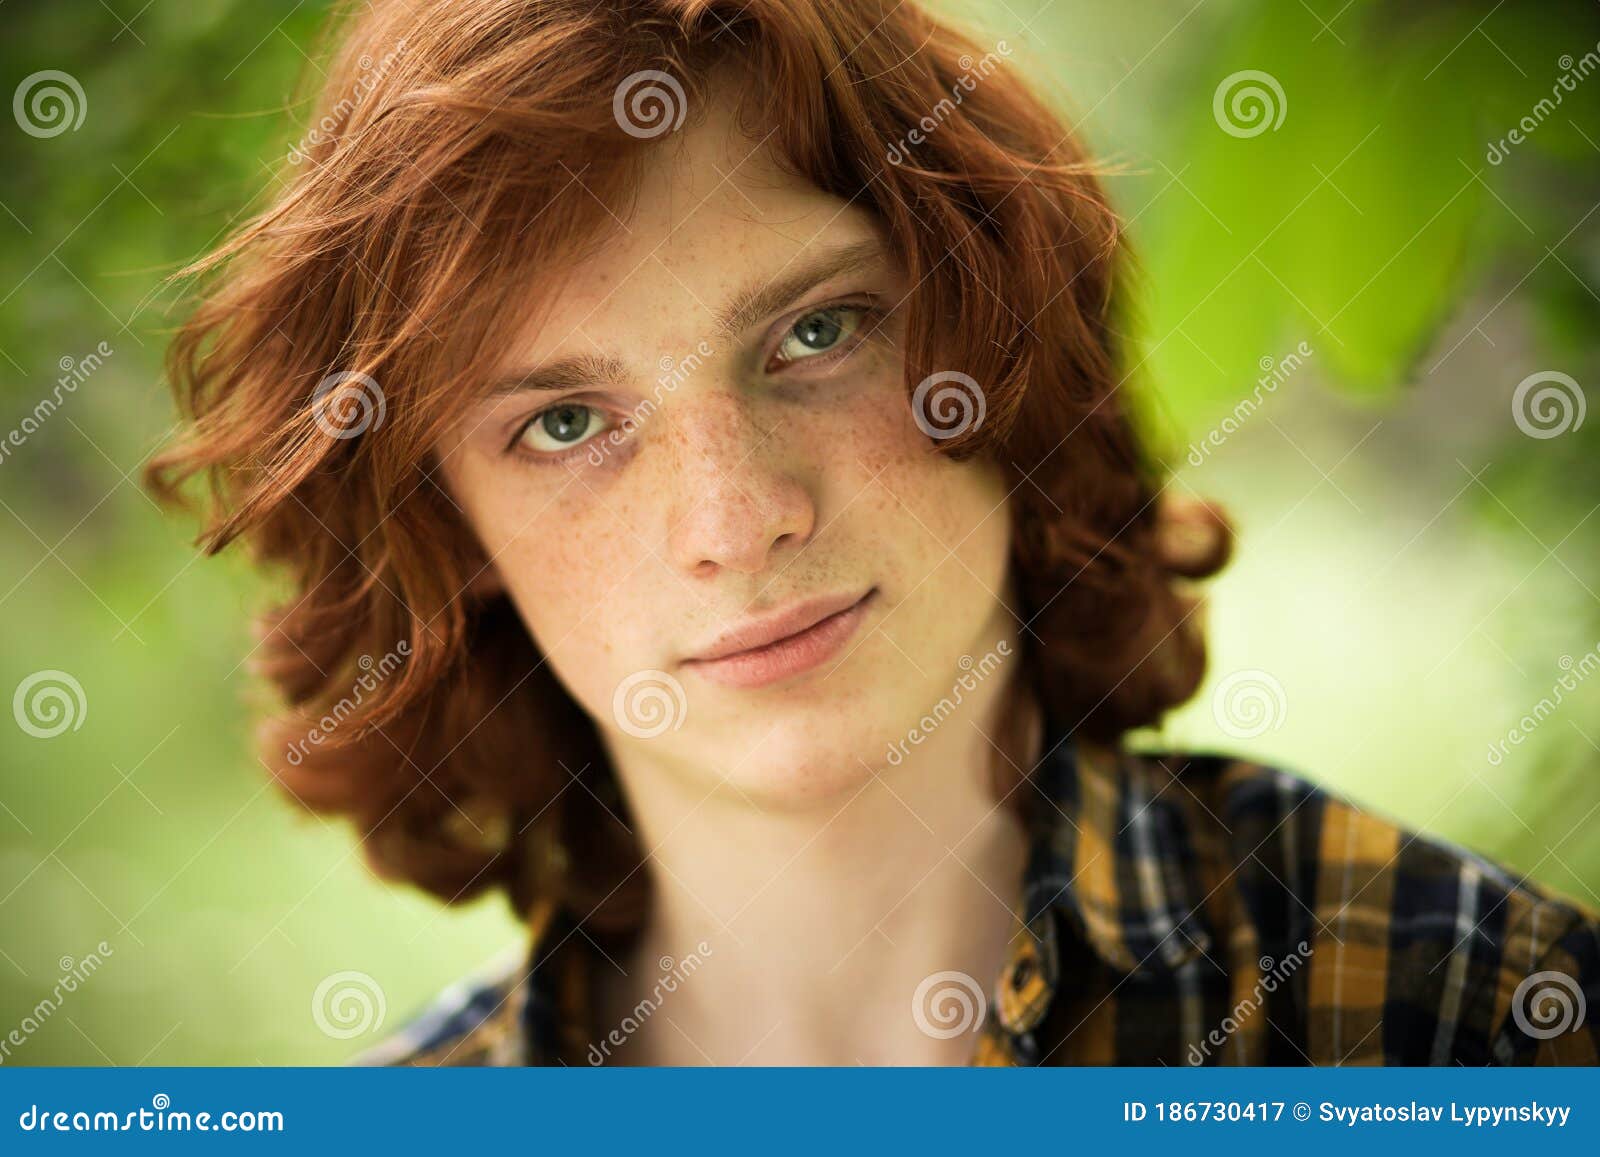 Red-haired Freckled Man Posing in Sunny Day Outdoors. Young Foxy Green-eyed  Handsome Stands on Green Floral Blurred Stock Image - Image of mysterious,  handsome: 186730417